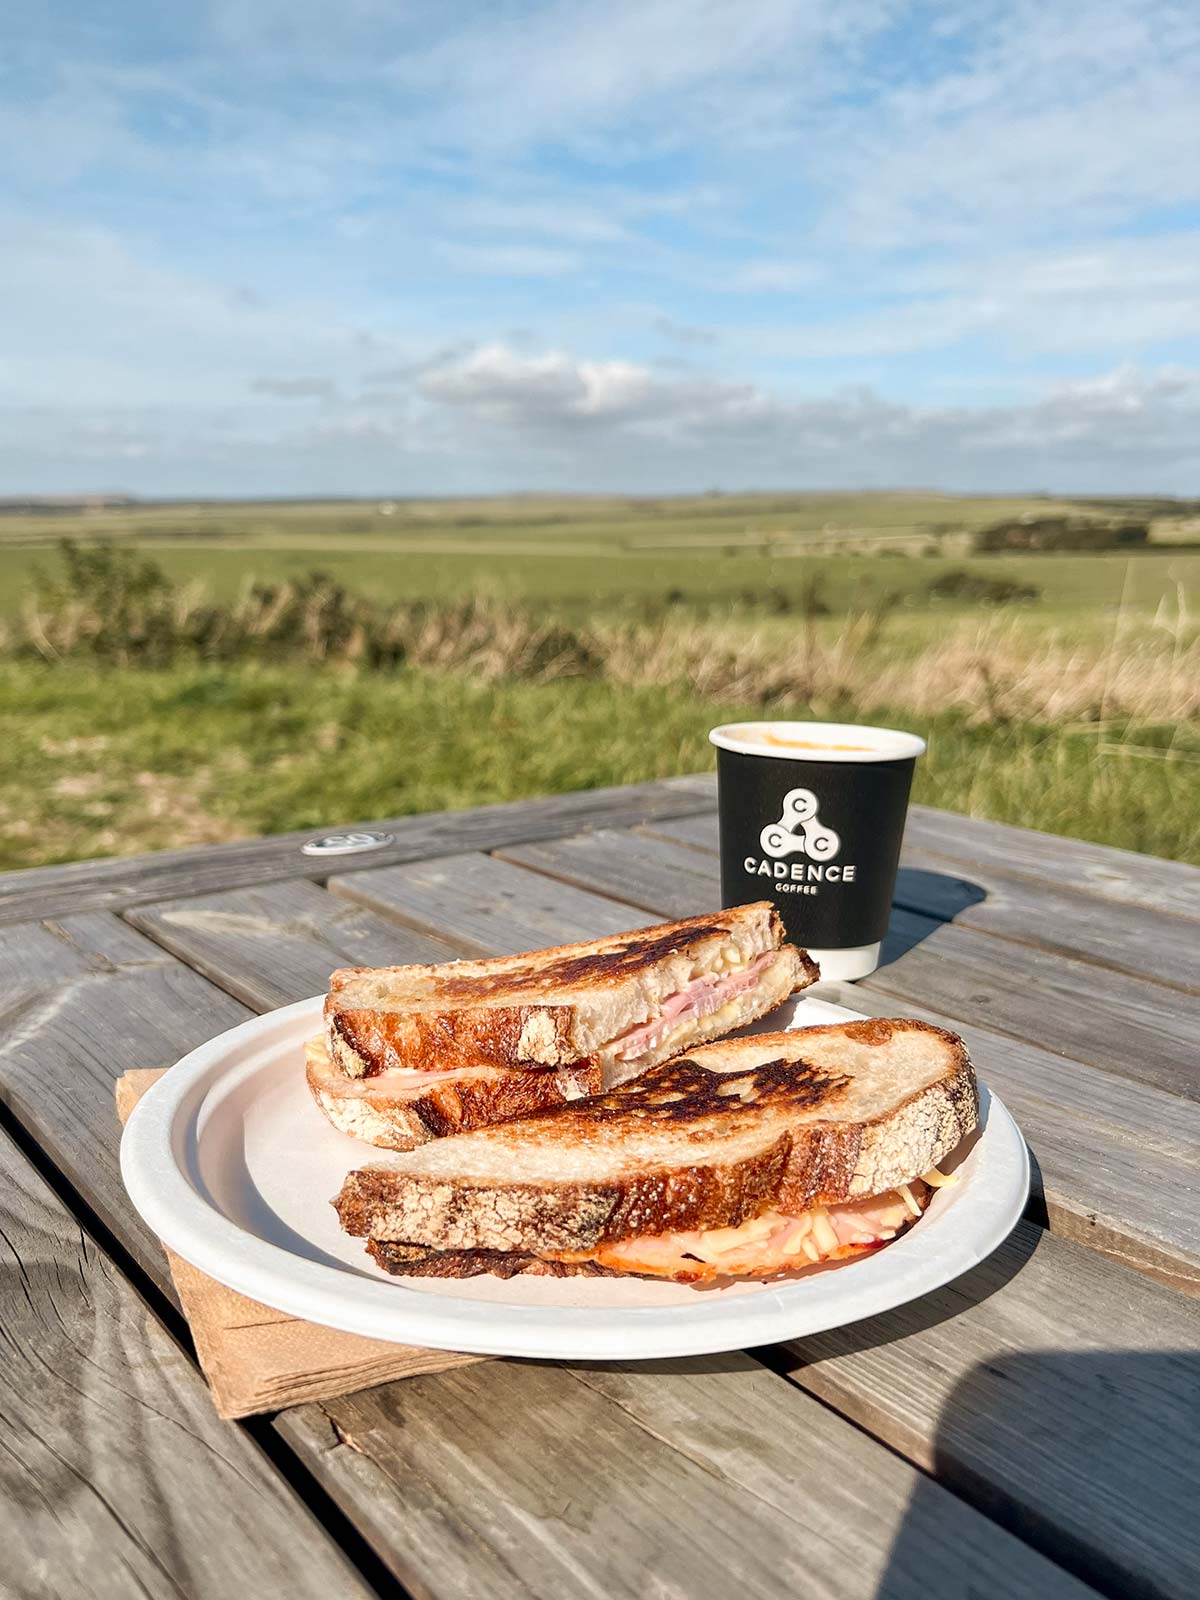 Grilled Cheese, Café Cadence Cycle Club, Beachy Head, East Sussex, Angleterre, Royaume-Uni / Toasties, Beachy Head, Seven Sisters, England, UK